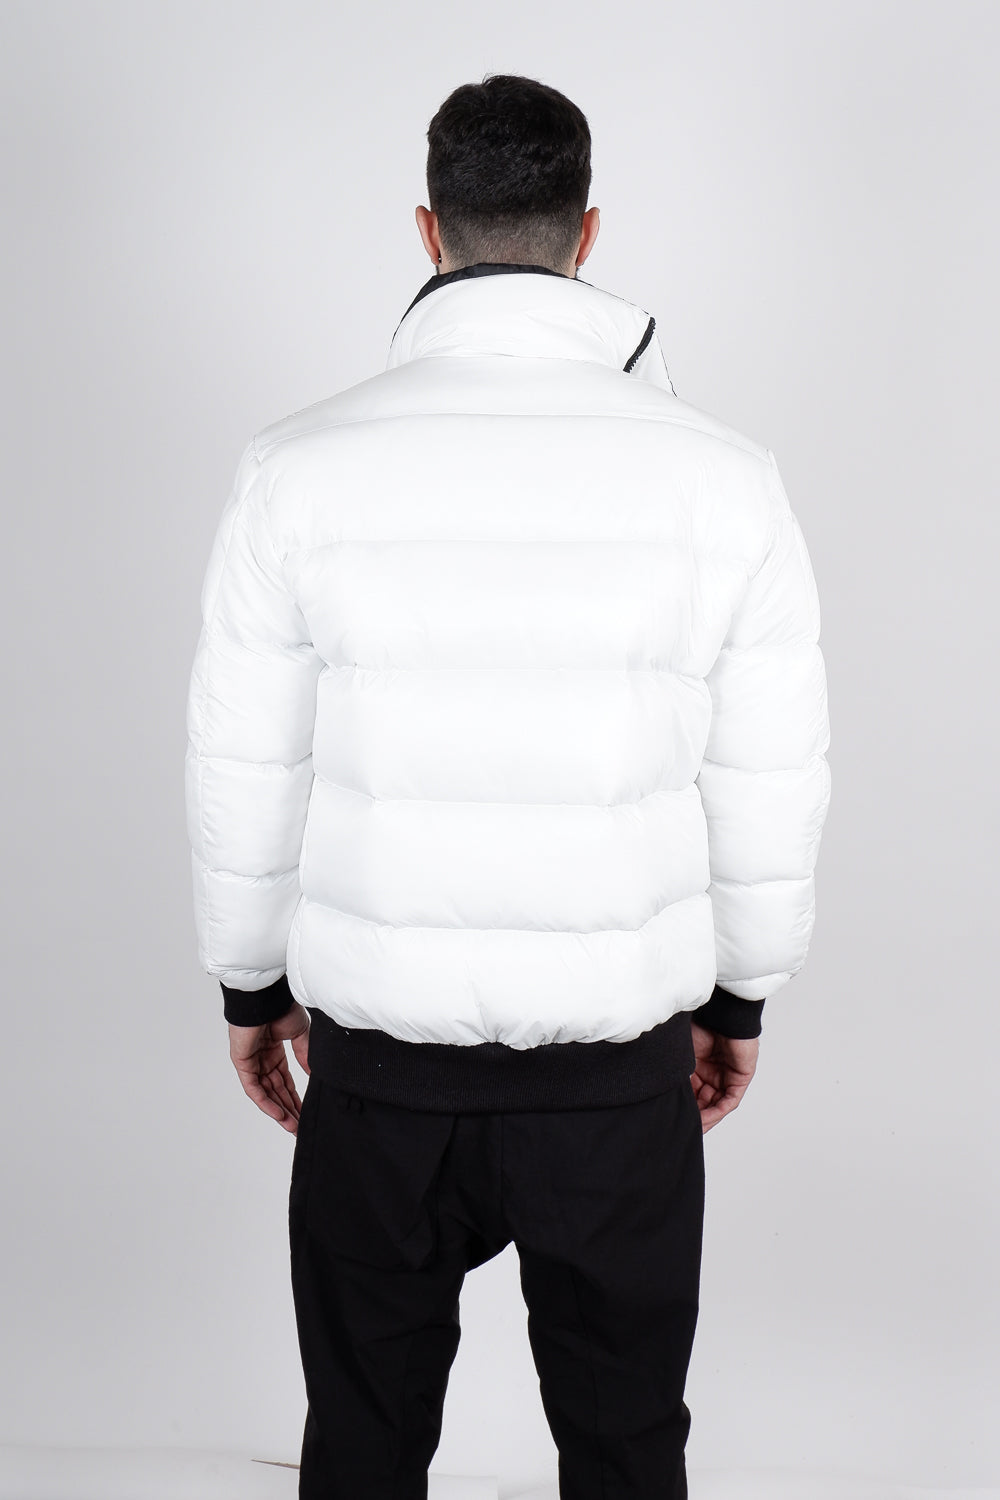 Buy the La Haine Inside Us 3P Woshot Down Jacket White at Intro. Spend £50 for free UK delivery. Official stockists. We ship worldwide.